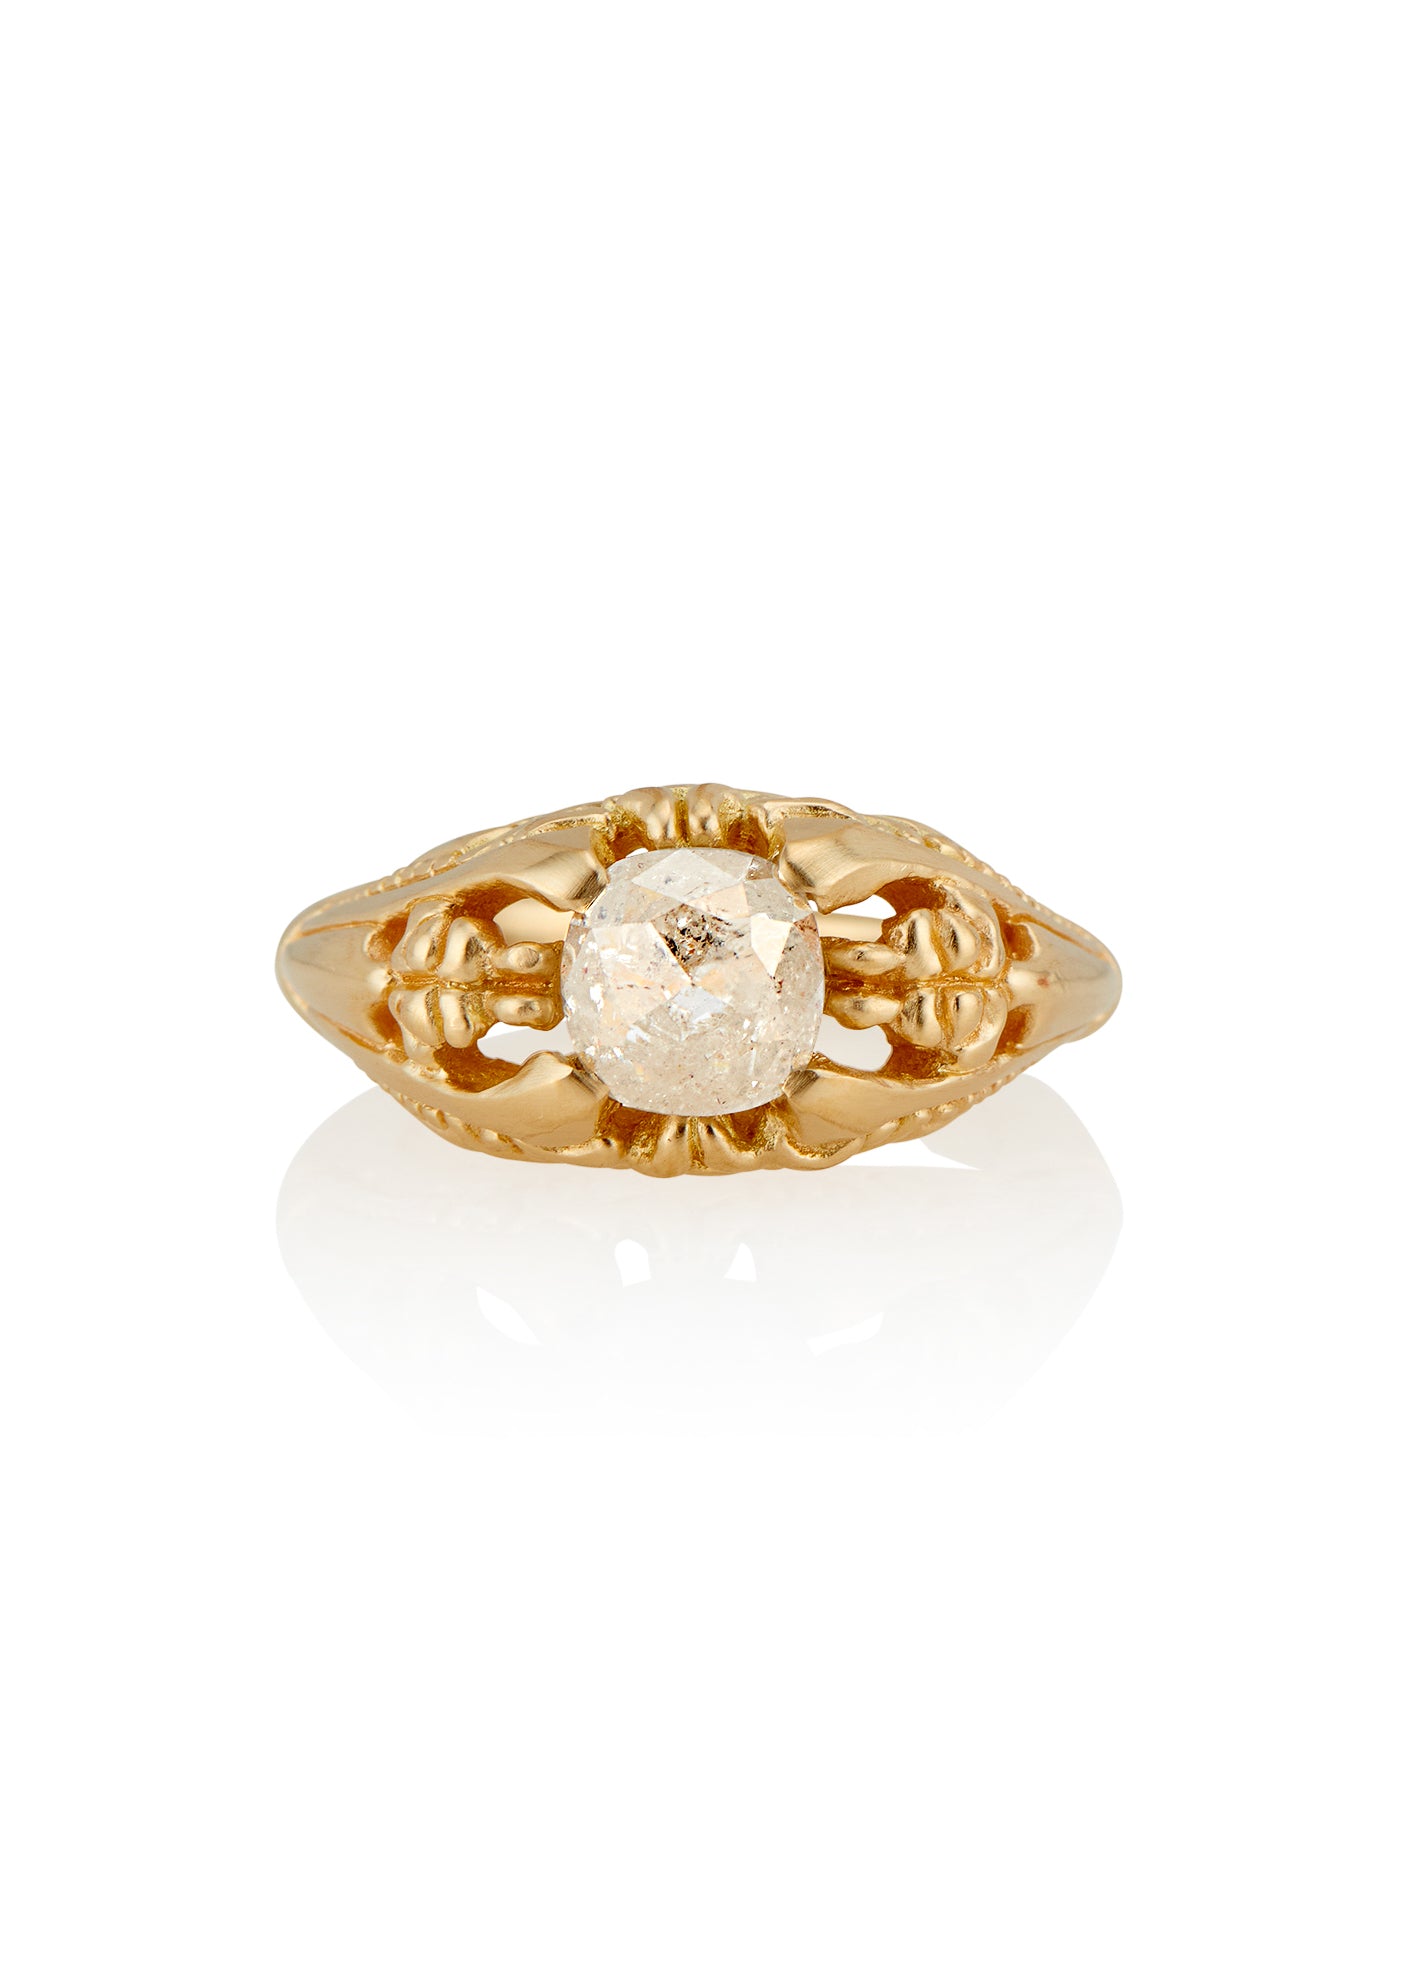 Capturing the ornate details of the Victorian era, the Violette ring was inspired by the love between Prince Albert and Queen Victoria. A substantial gold band is rich in intricate detail, showcasing craftsmanship with each bead, curve and open space. A stunning rose cut diamond sits flush among the prongs, creating a romantic ring to cherish for the ages. 